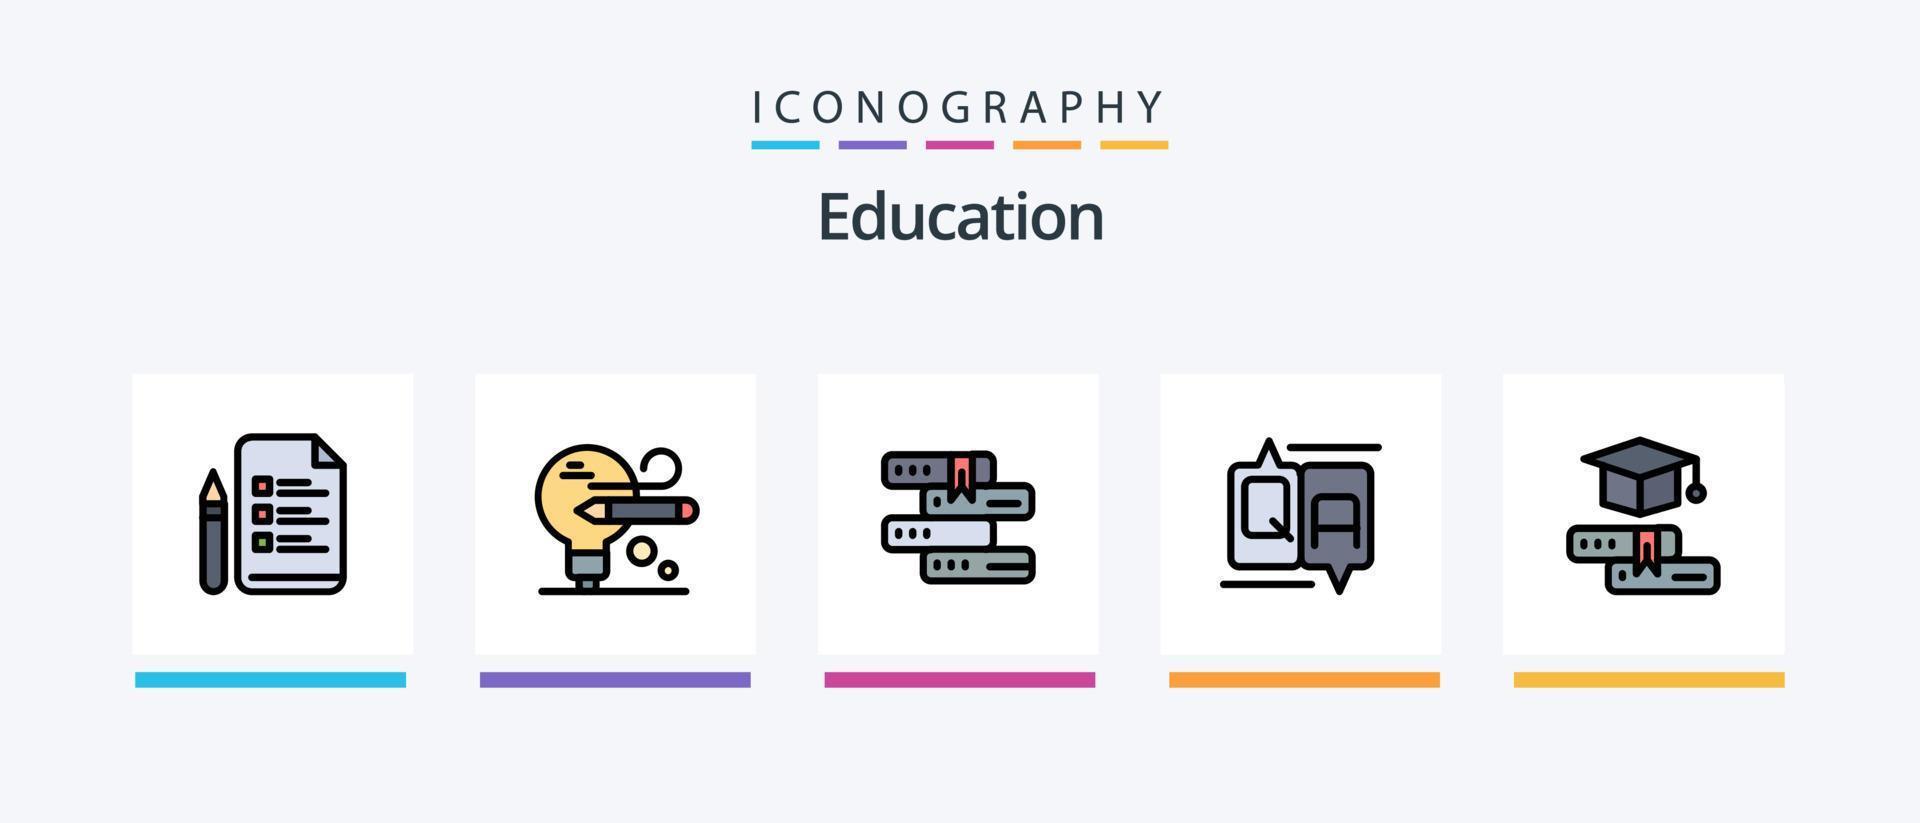 Education Line Filled 5 Icon Pack Including oneducation. mobile. file. education. bulb. Creative Icons Design vector